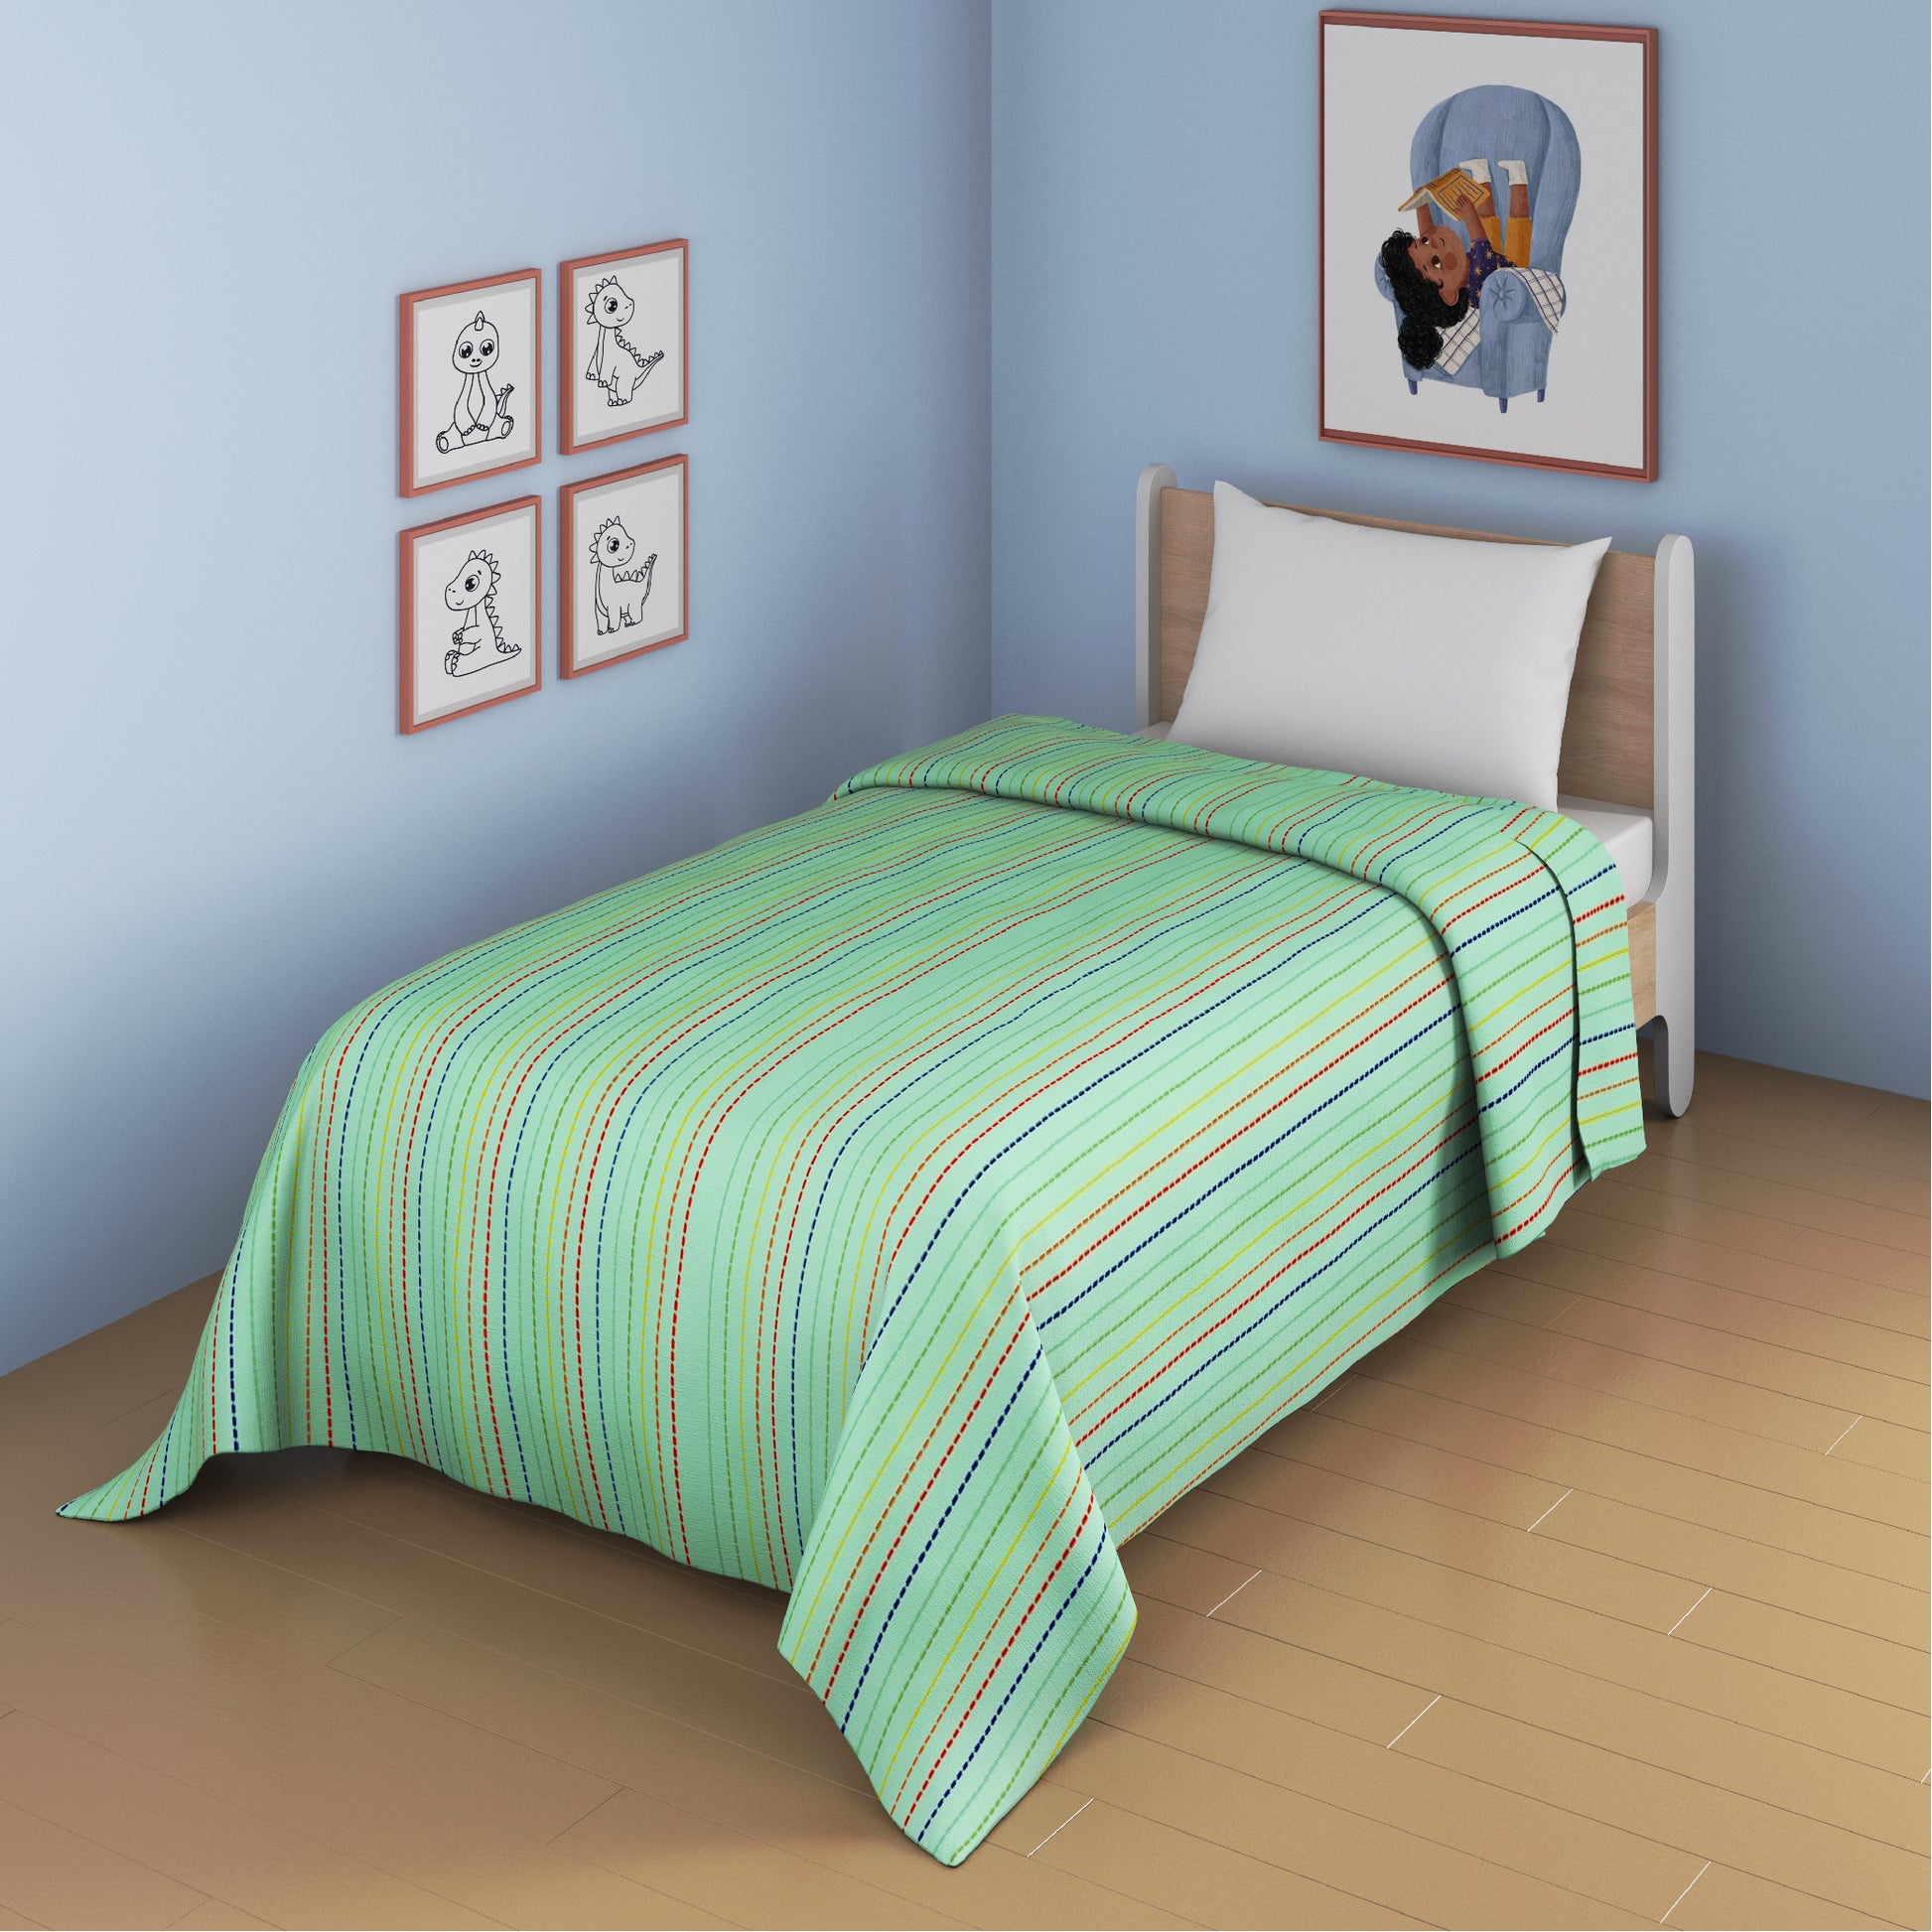 media_gallary Cursive Lines Coverlet Single Bed Size 1